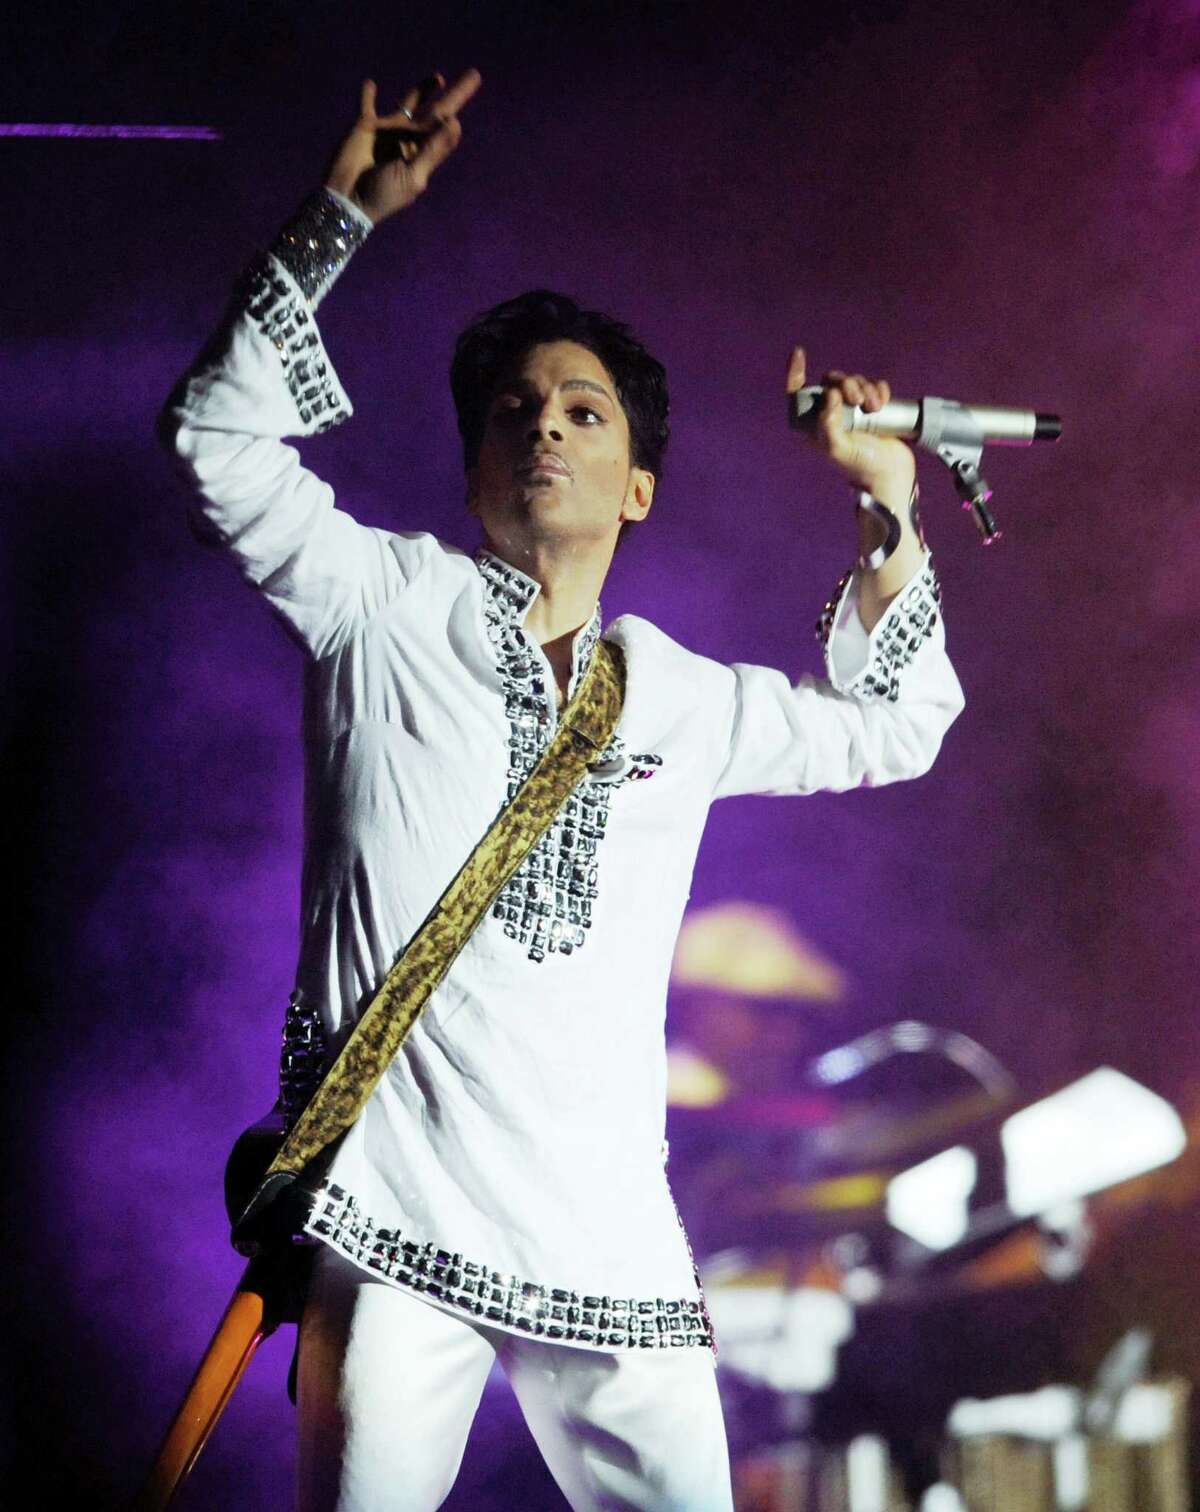 In this April 26, 2008, file photo, Prince performs during the second day of the Coachella Valley Music and Arts Festival in Indio, Calif. A law-enforcement official says that tests show the music superstar died of an opioid overdose. Prince was found dead at his home on April 21, 2016, in suburban Minneapolis. He was 57.